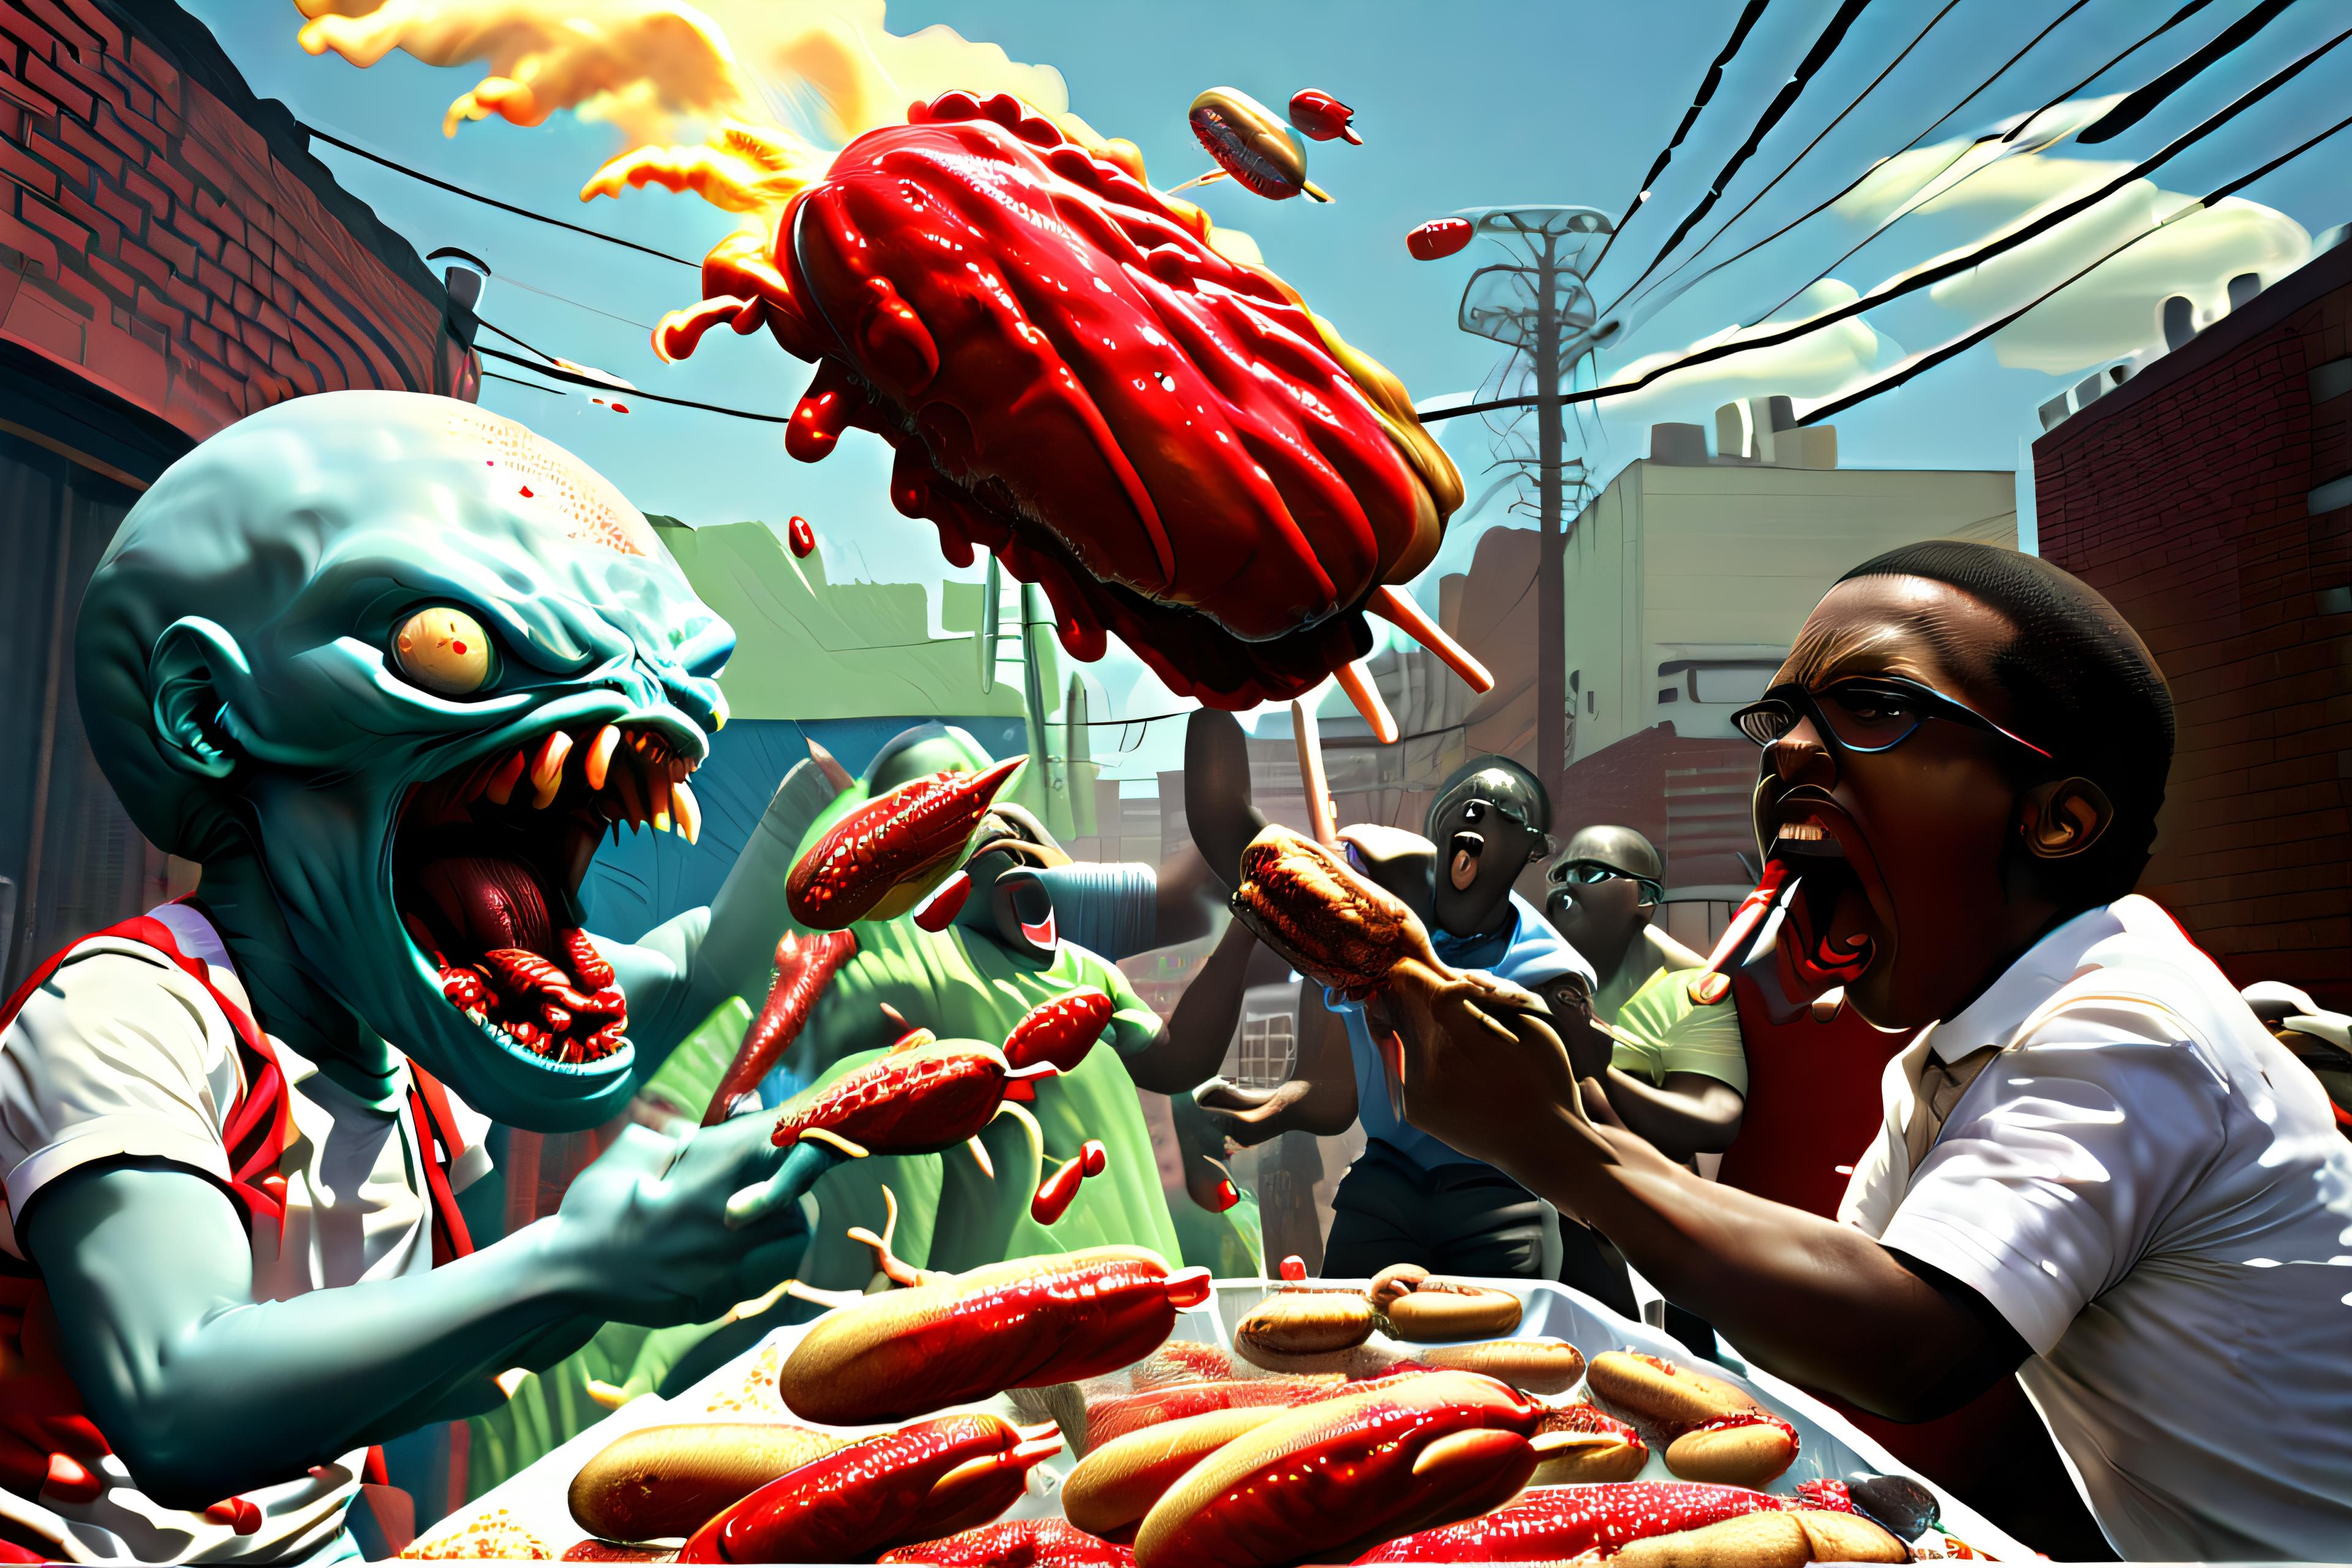 Cookout Food Fight image by patricktoba